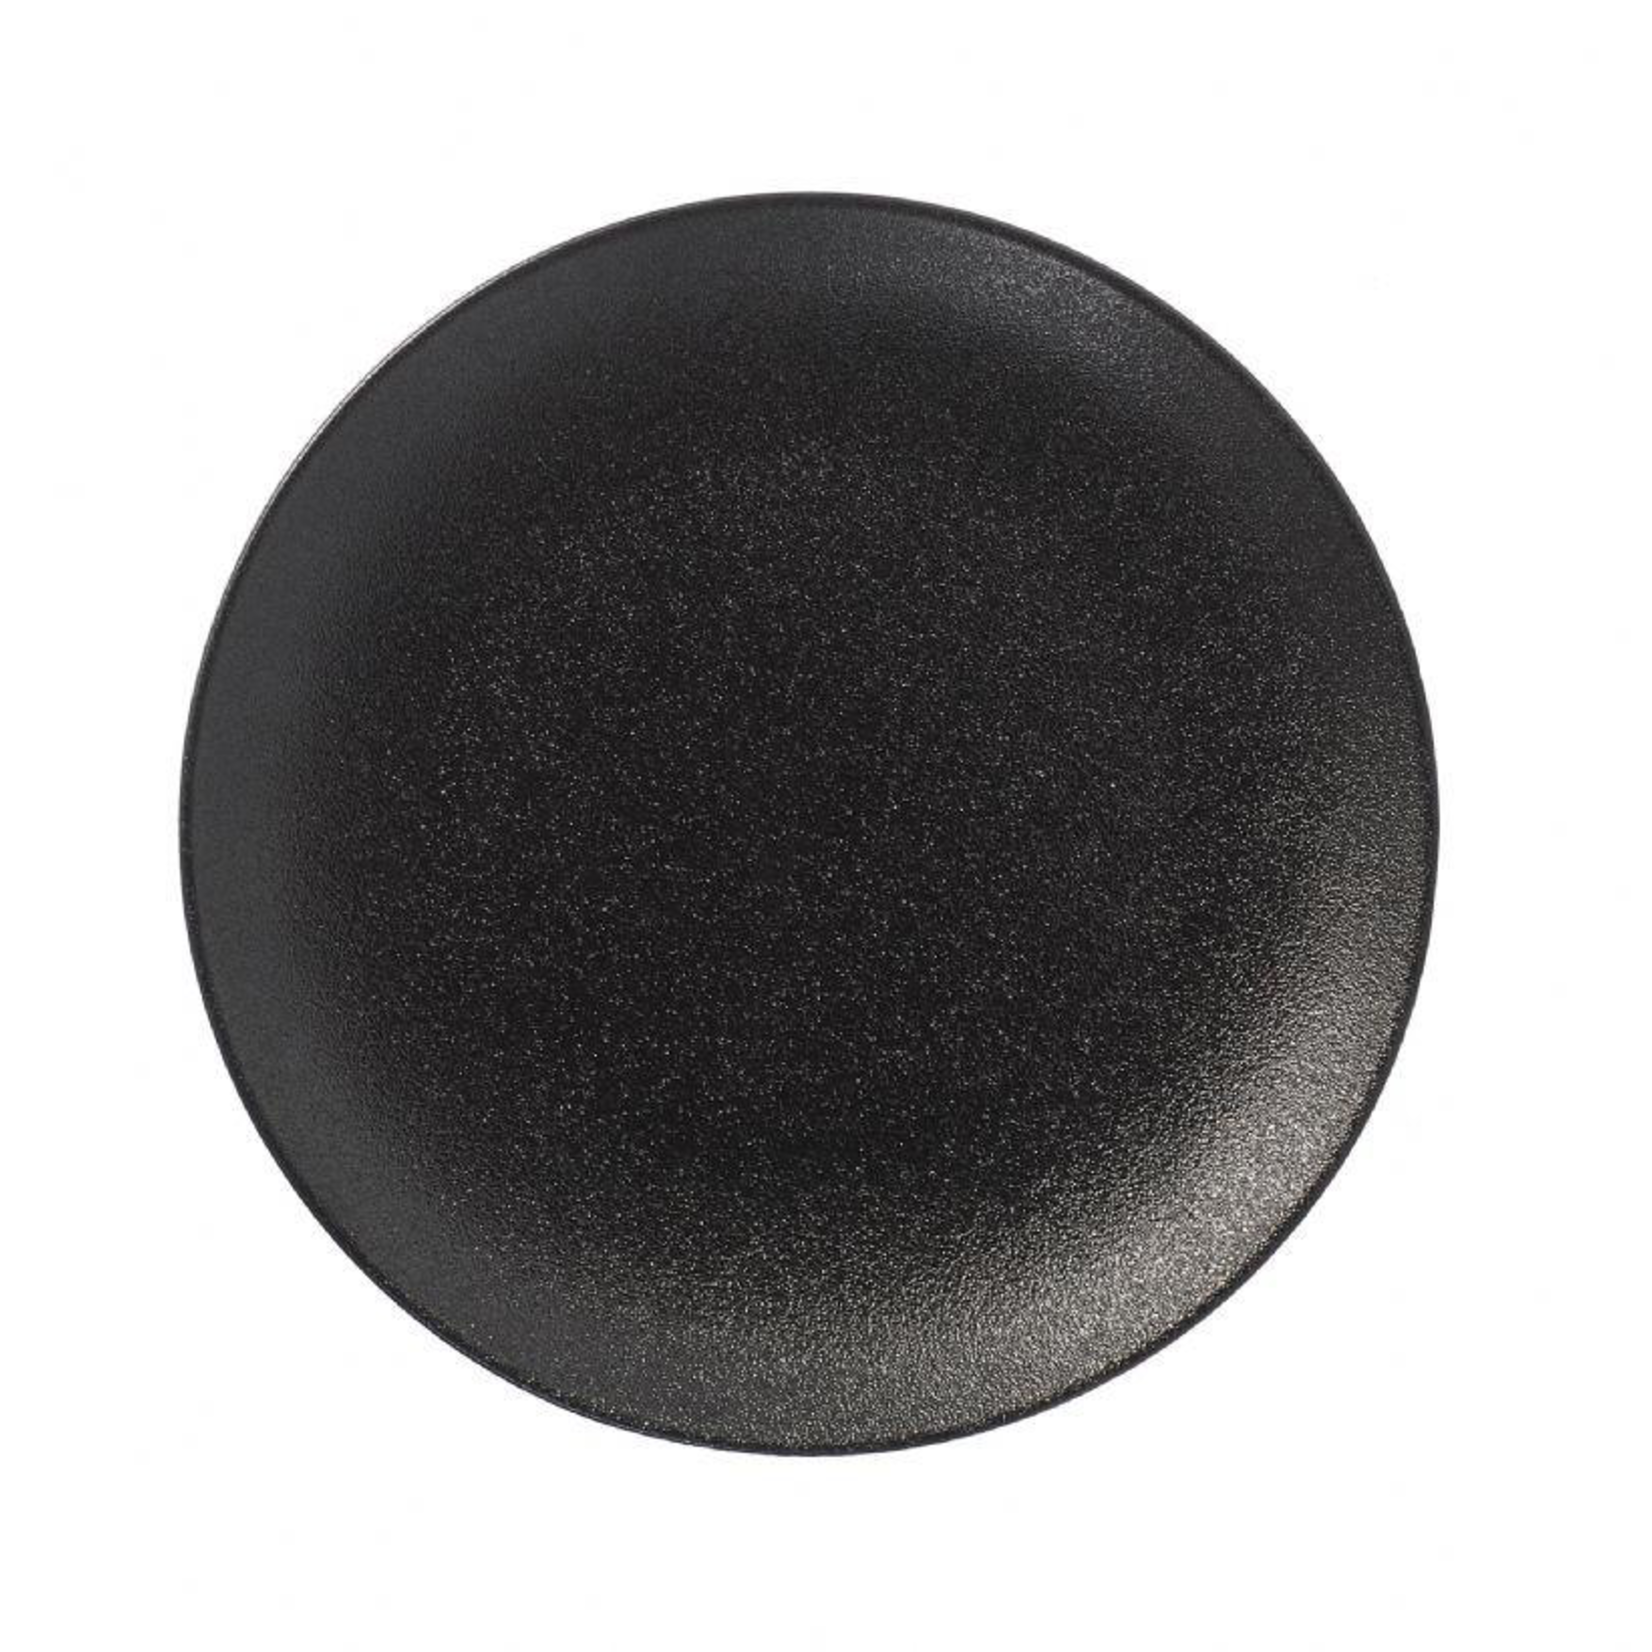 Palate and Plate BK-0080 10'' Black Round Coupe Black Plate 12/cs PROMOTION